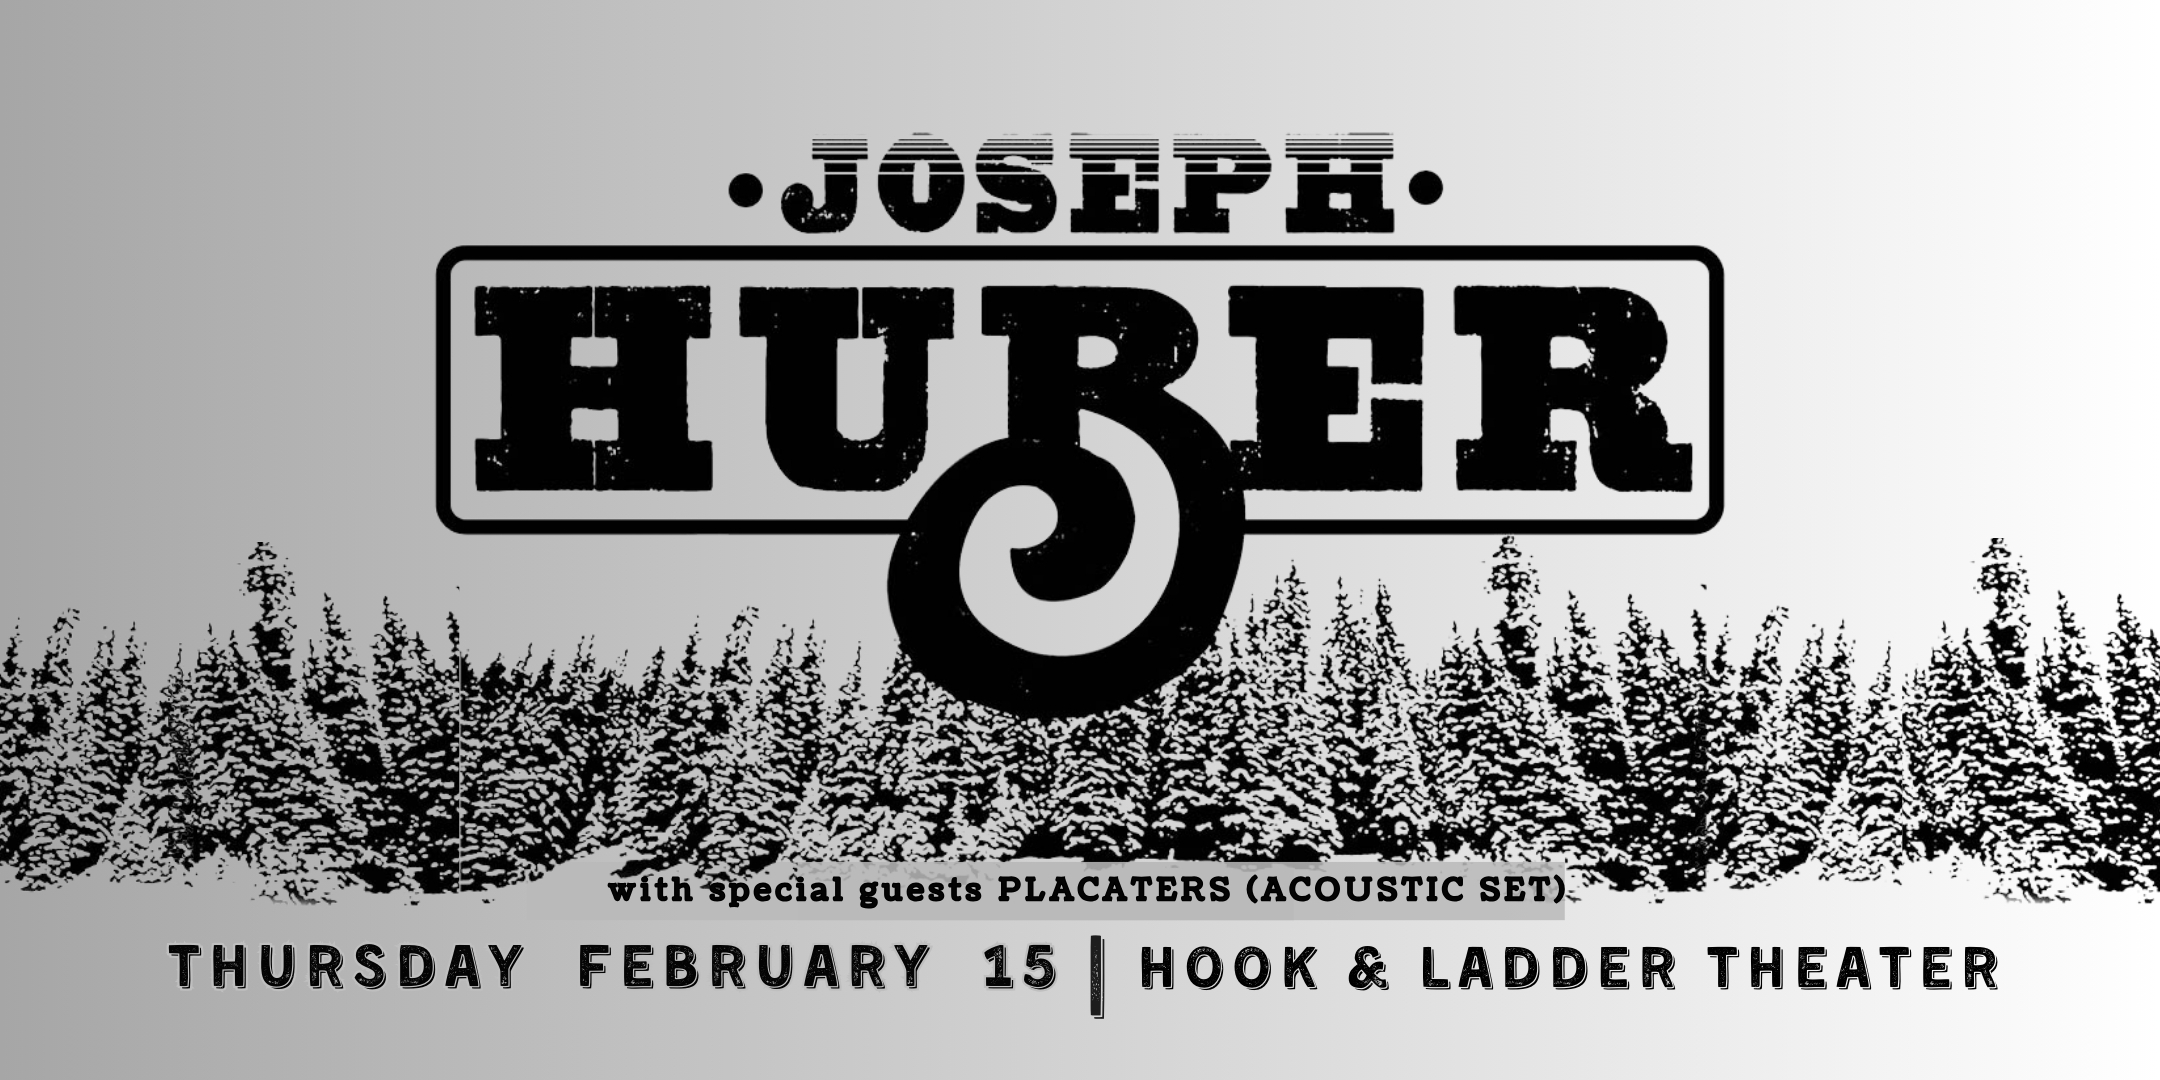 Joseph Huber w/special guests Placaters (acoustic set) Thursday, February 15 The Hook and Ladder Theater Doors 7:30pm :: Music 8:00pm :: 21+ $17 ADV / $22 DOS